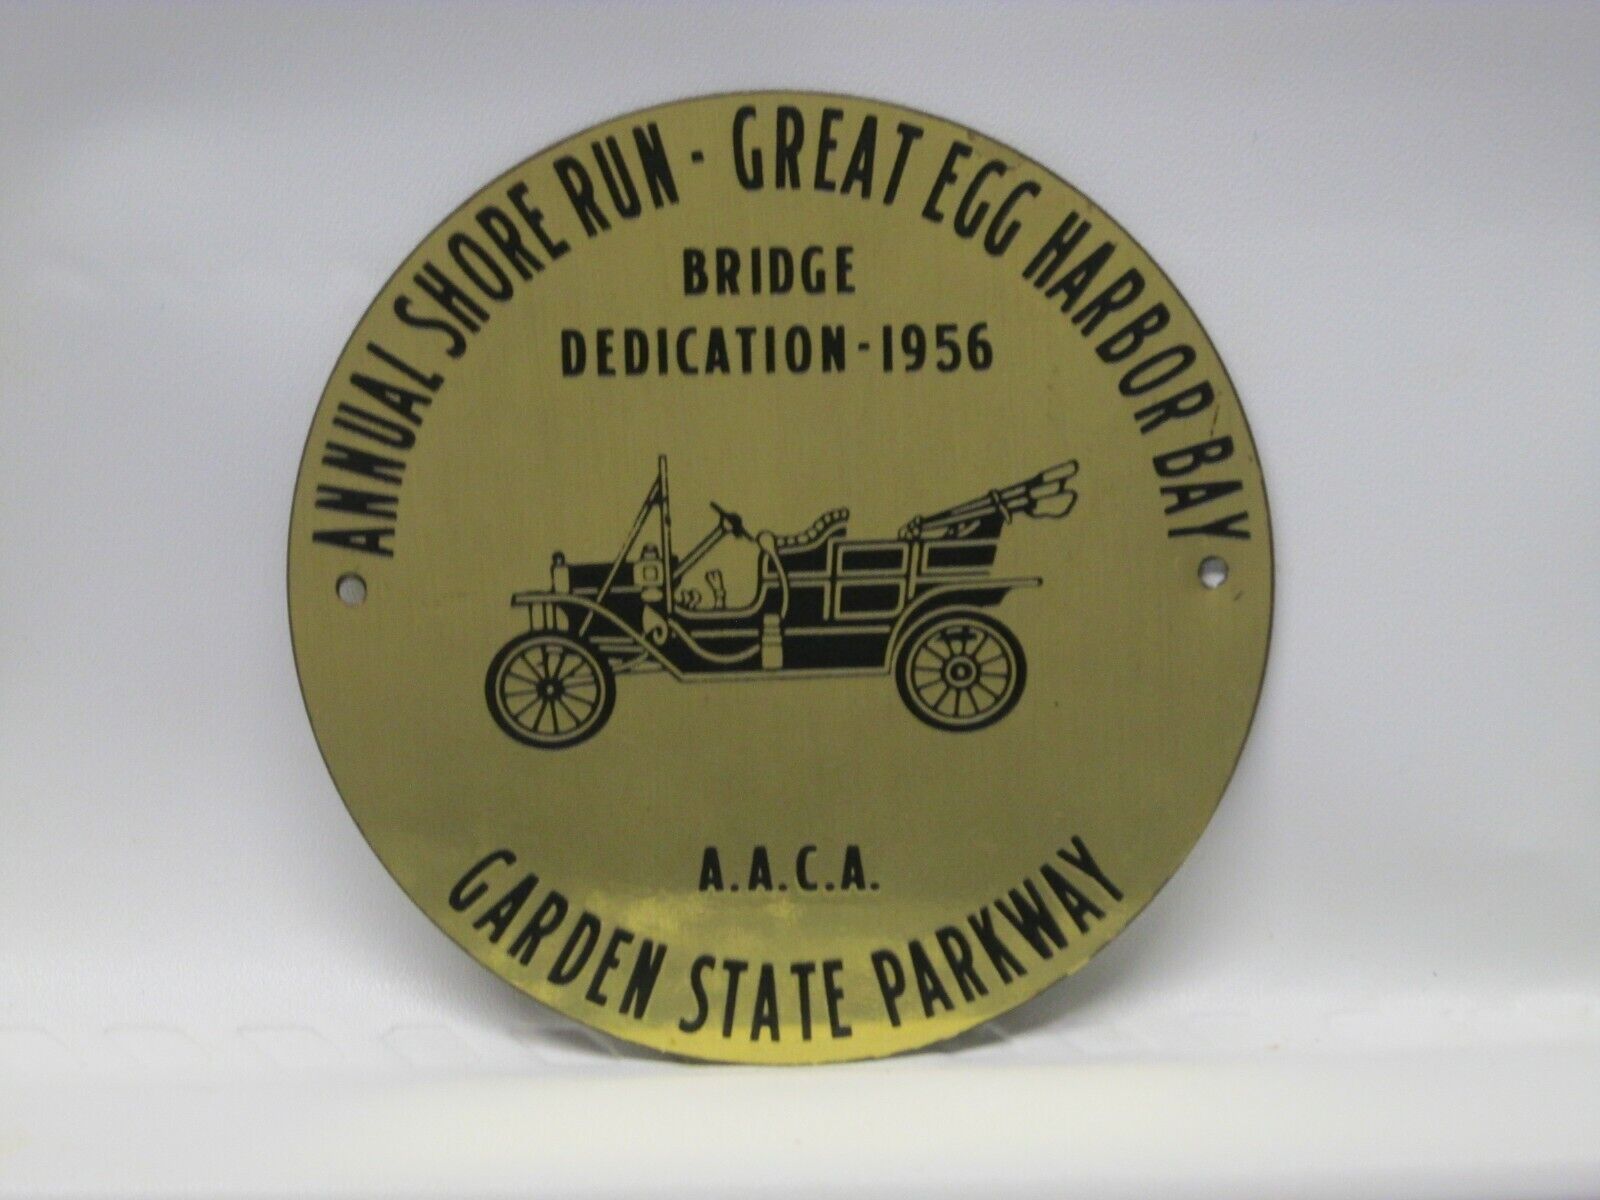 1956 AACA  Annual Shore Run Dash Plaque, Great Egg Harbor Bay, NJ, gd used cond